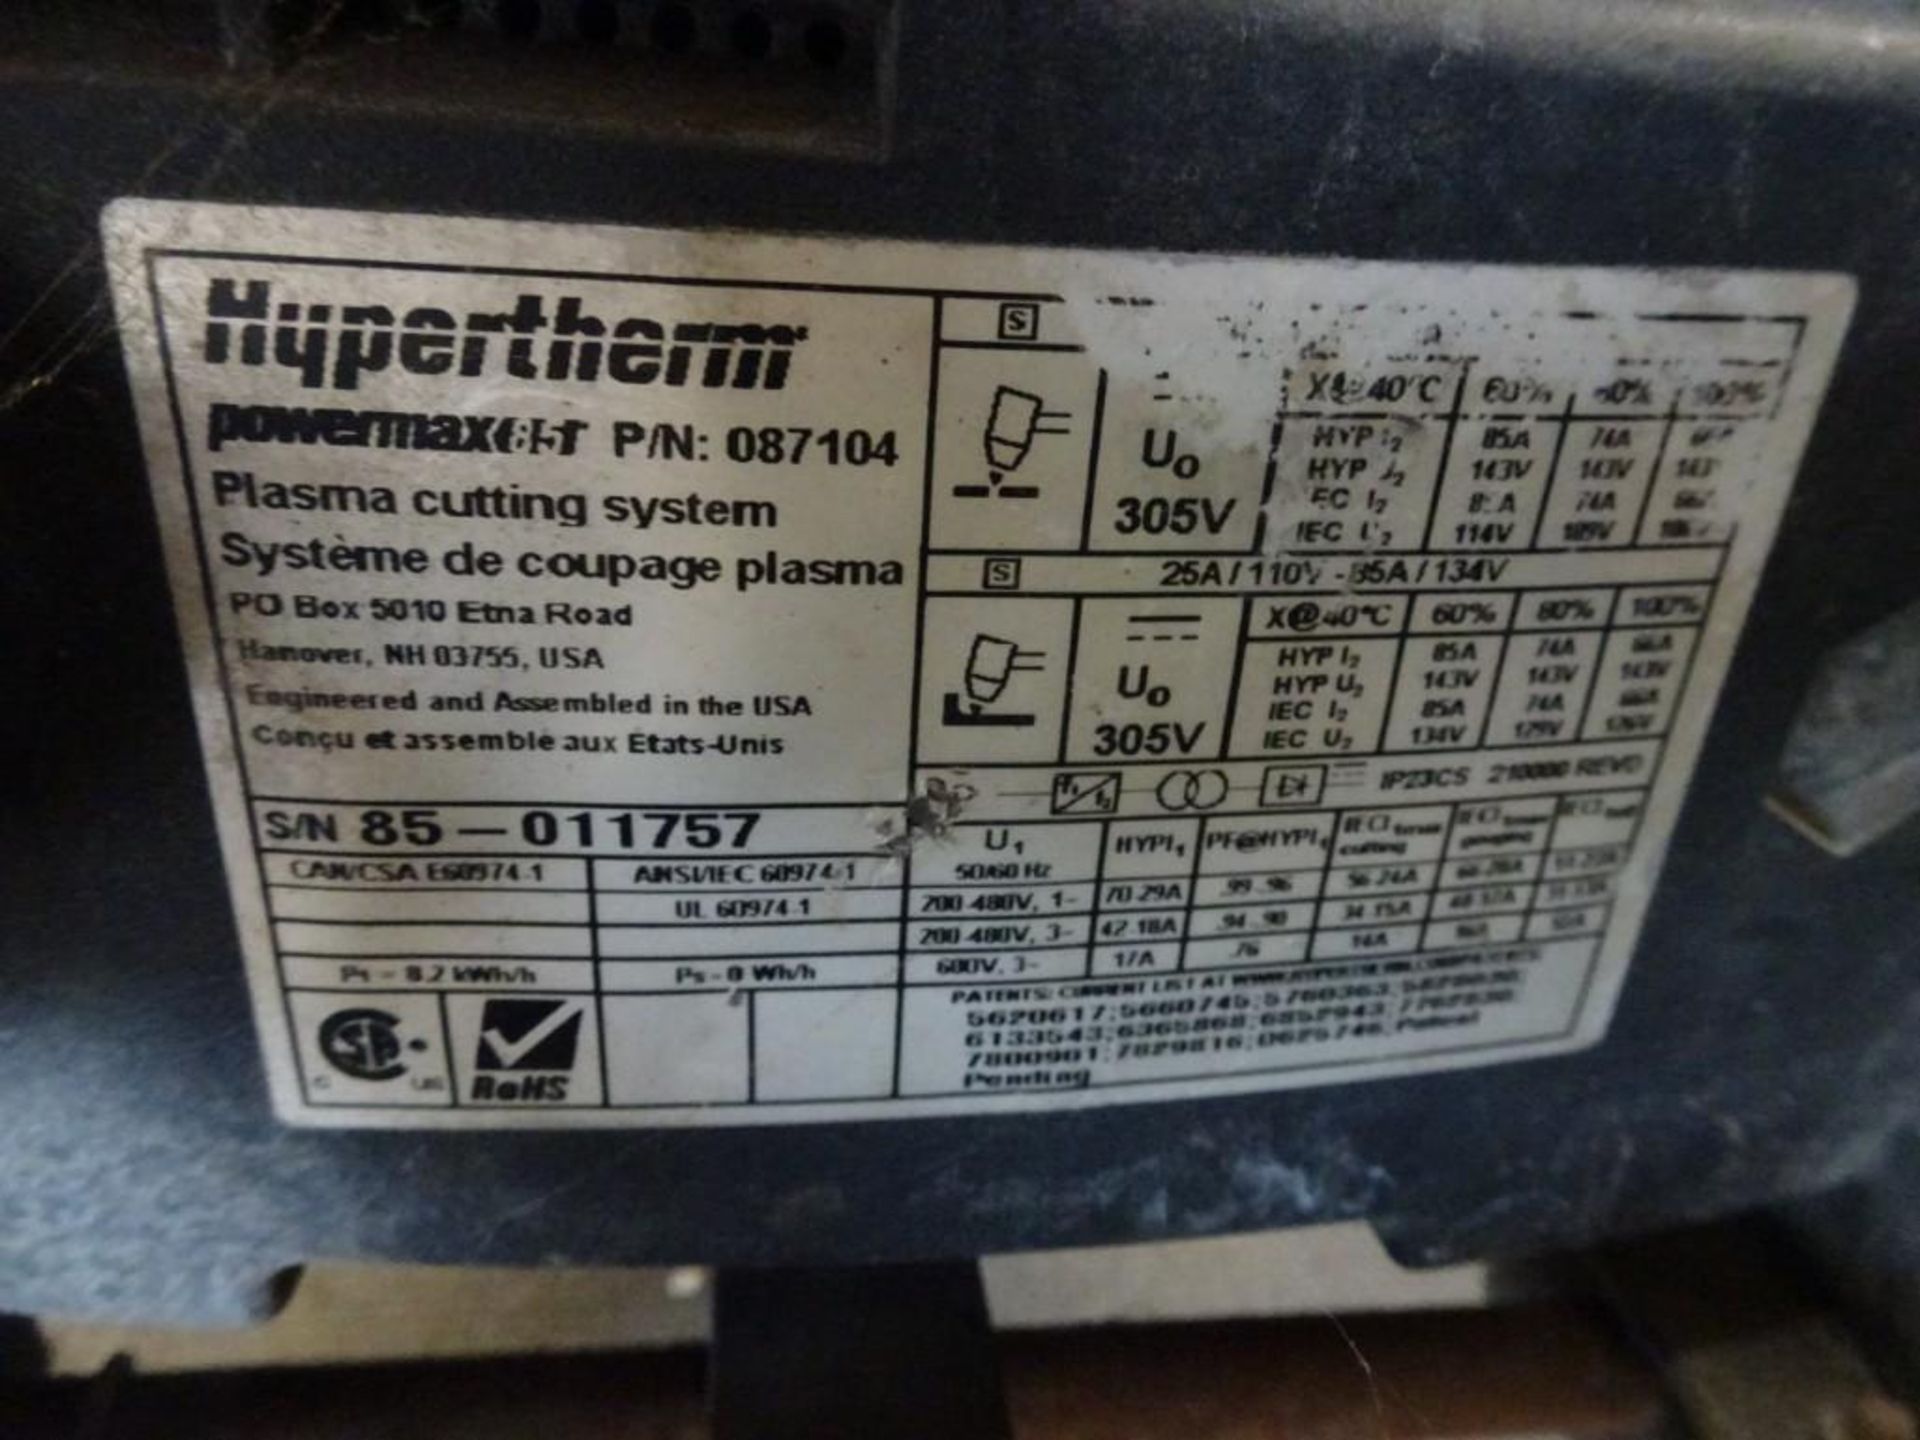 Hypertherm Powermax 85 Plasma Cutter 85 AMPS, 134 v - Image 3 of 4